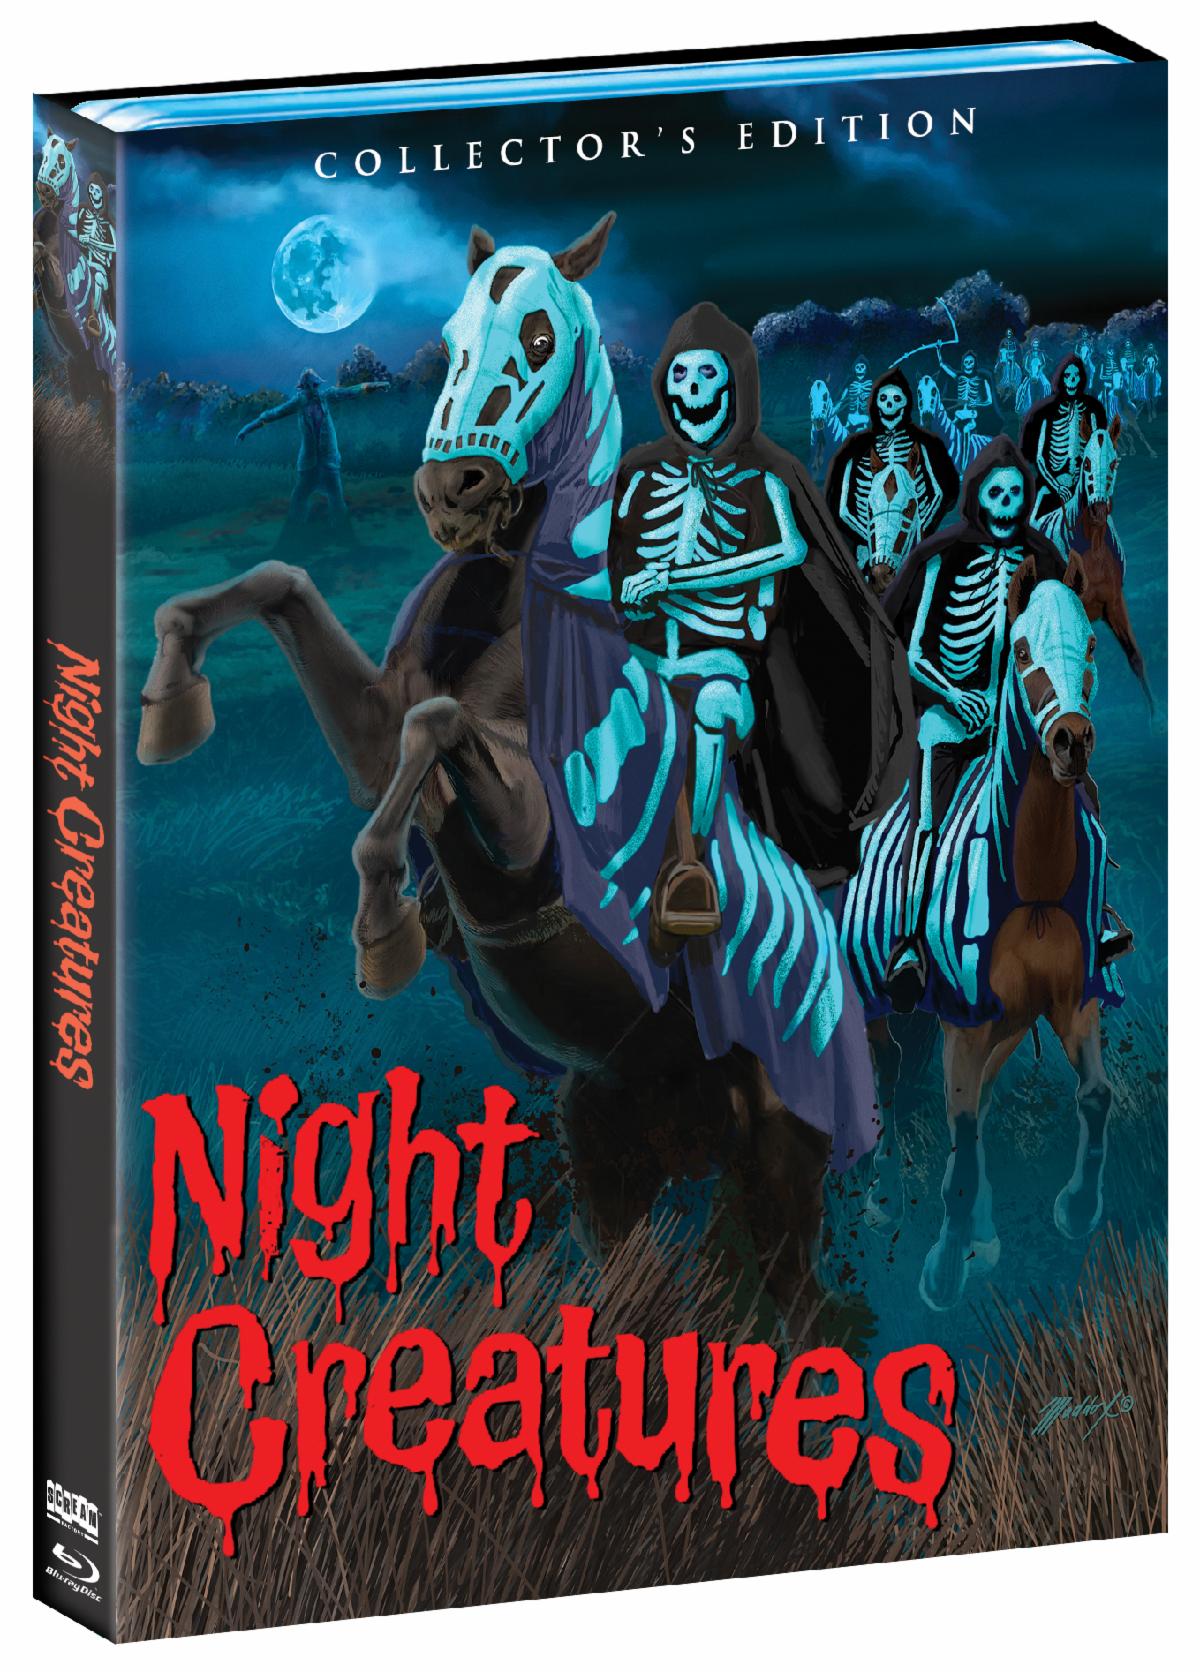 Night Creatures Collector's Edition Blu-ray